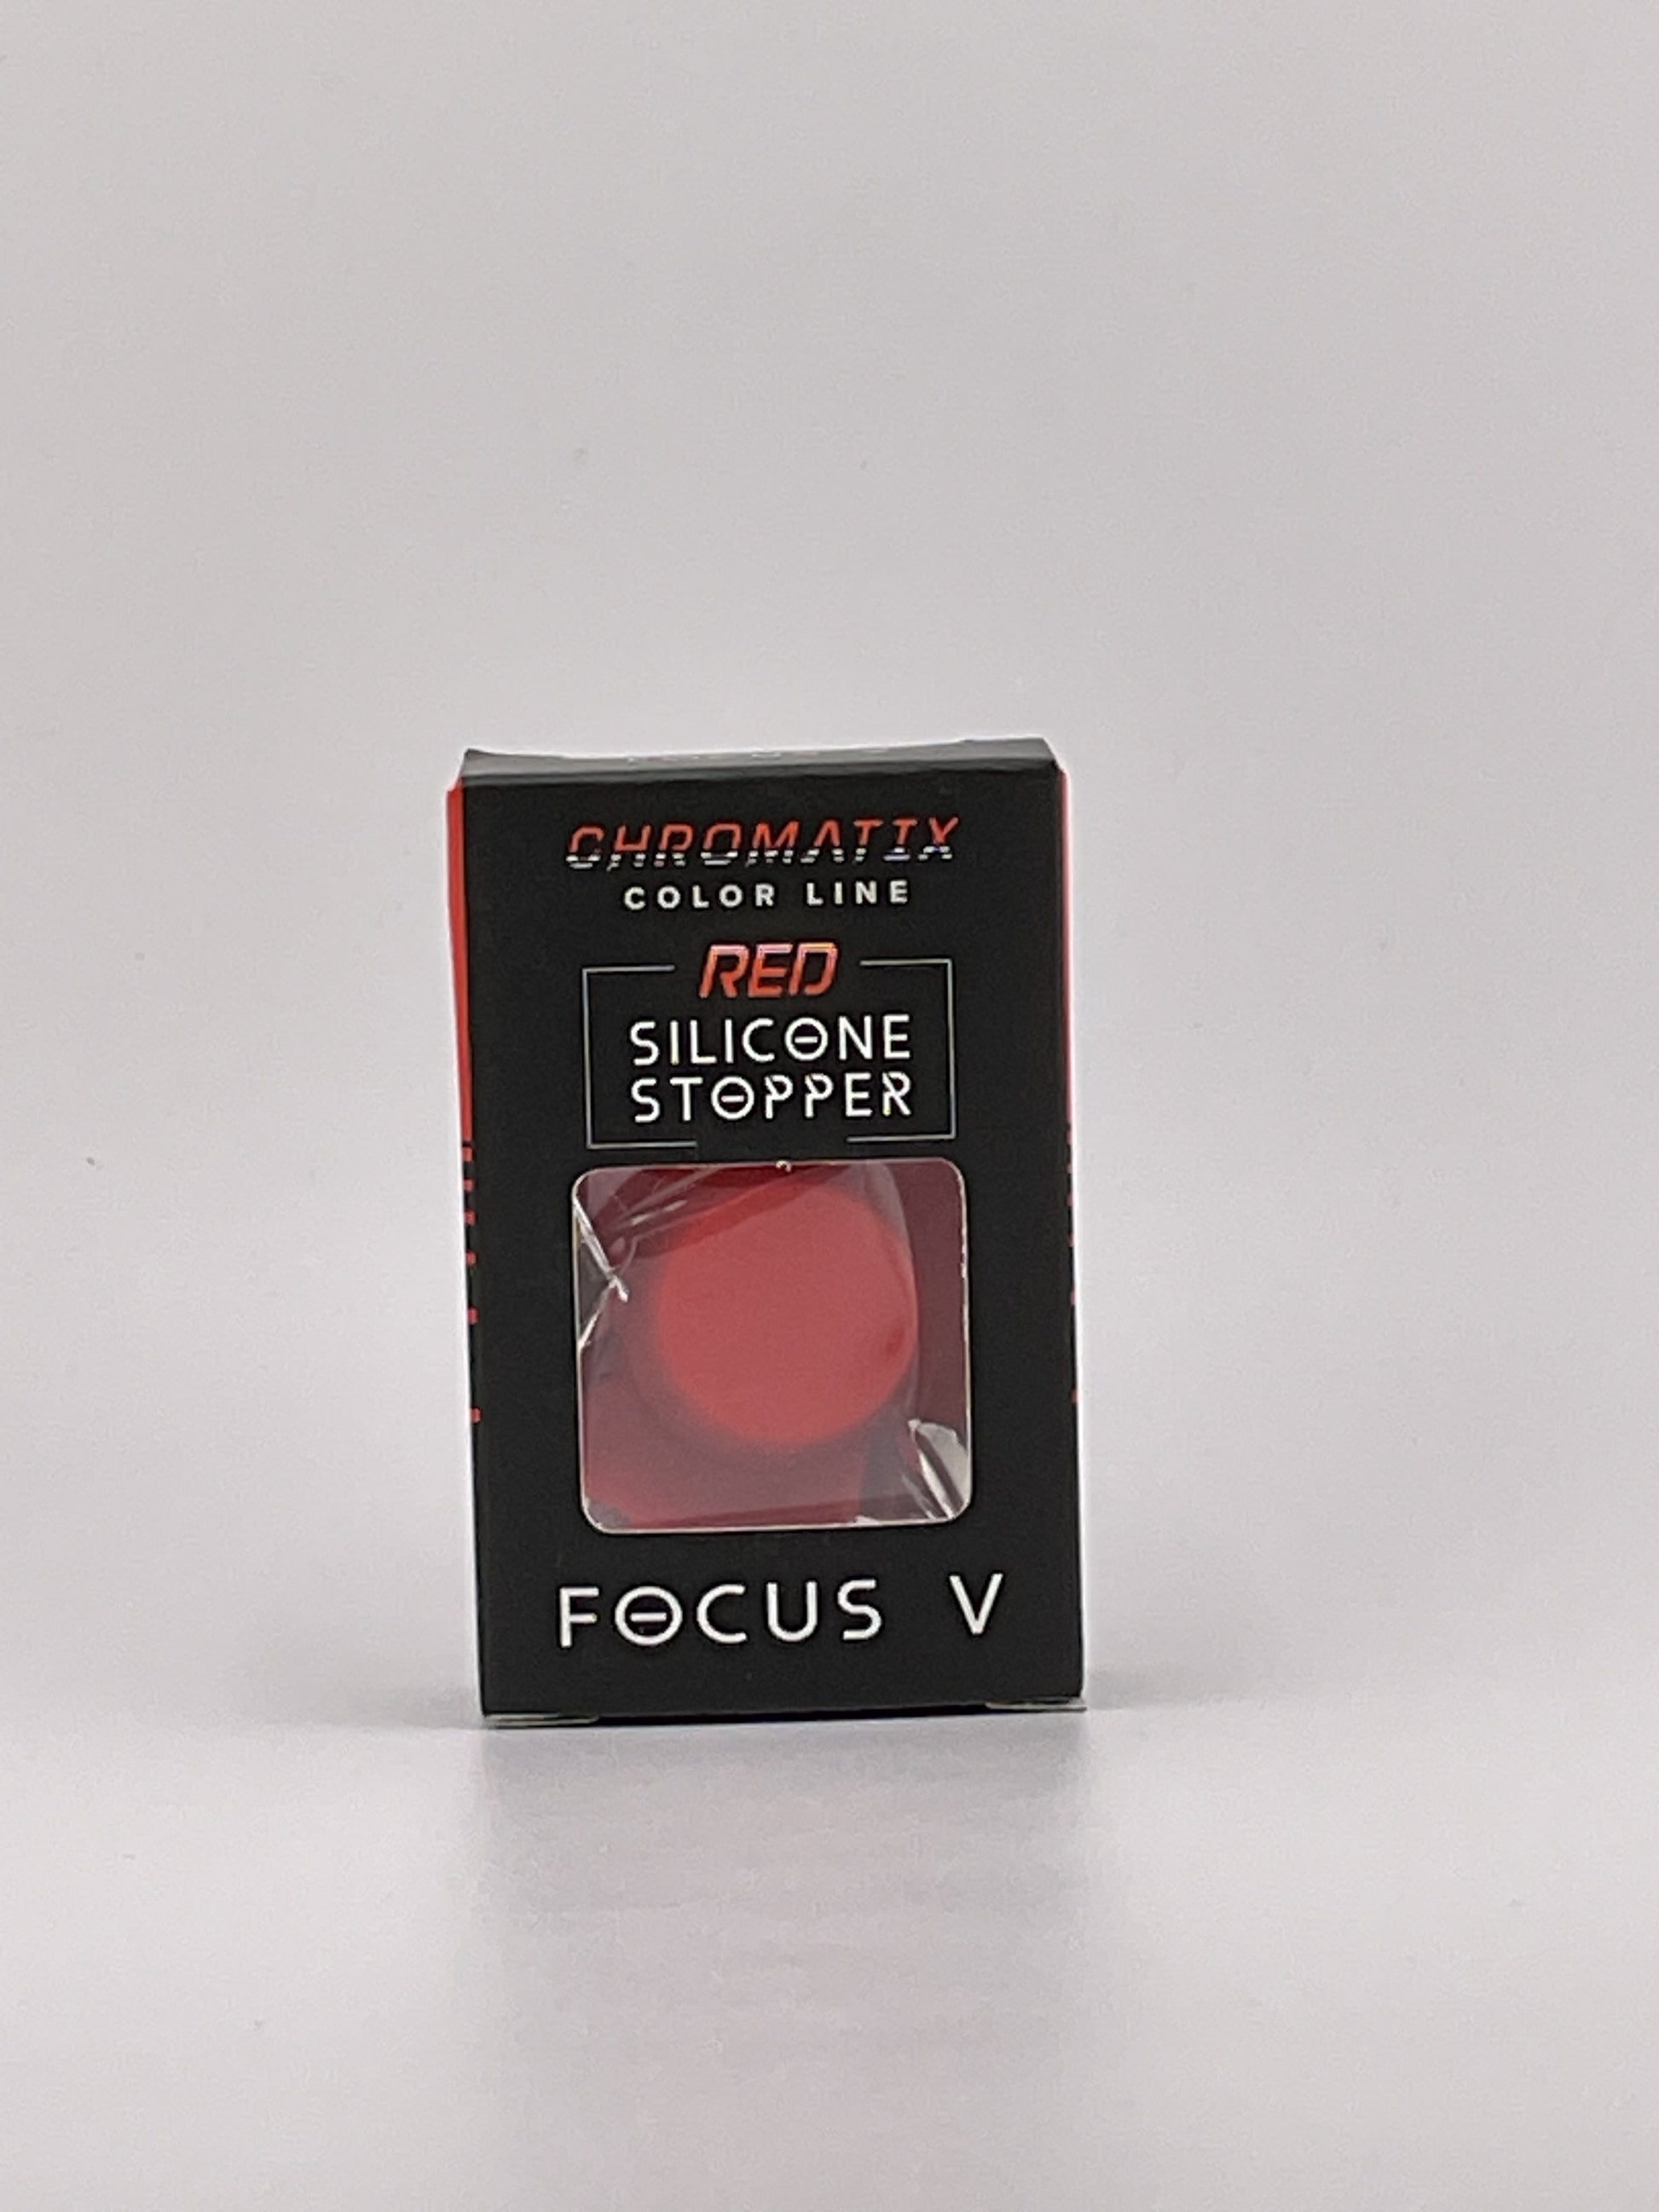 Carta focus V Red silicone stopper

Available for pickup in post falls Idaho